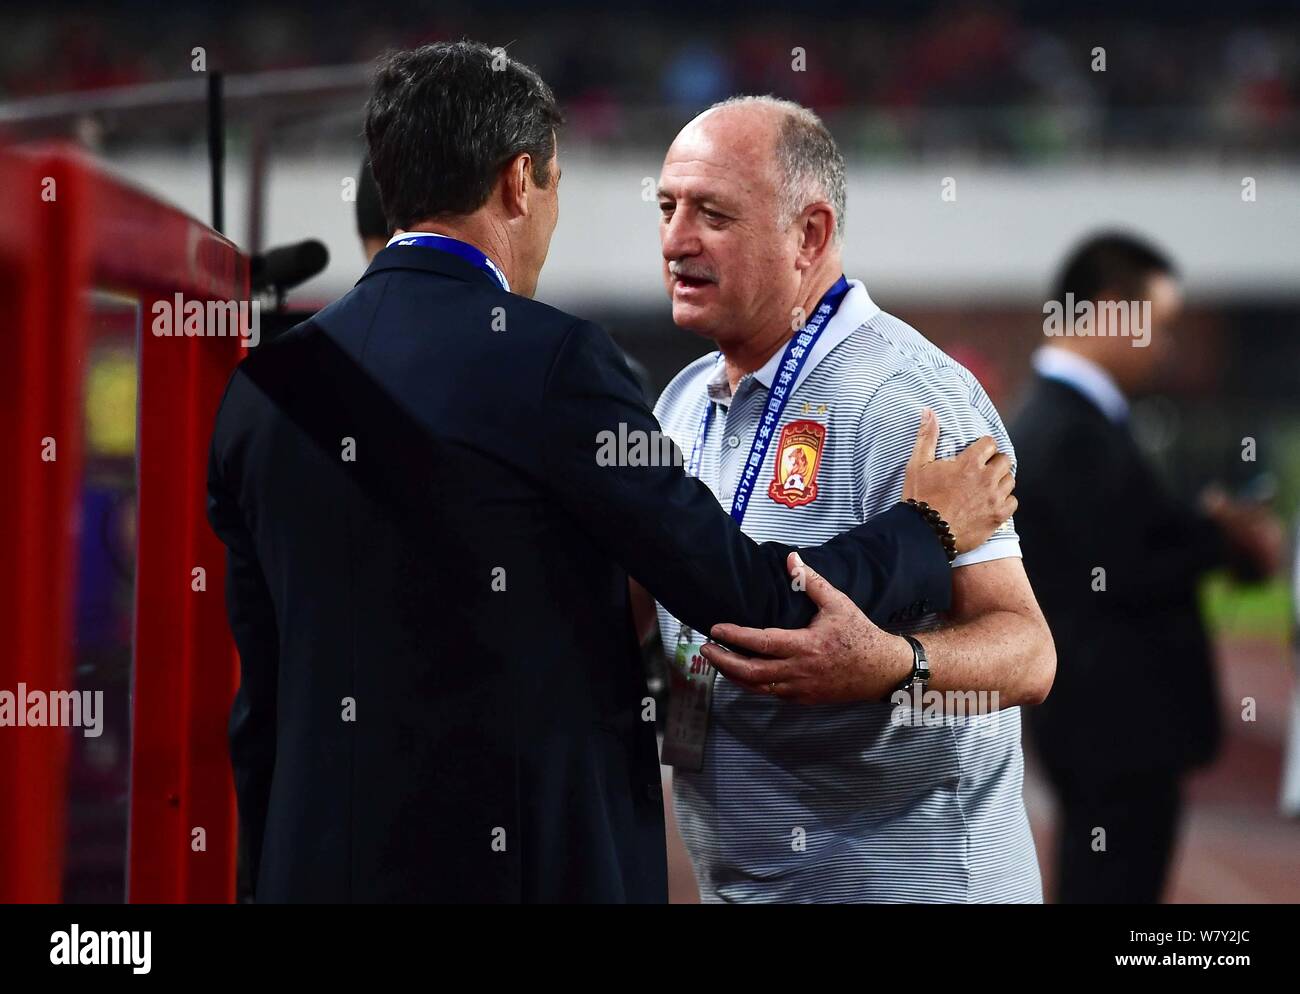 Head coach Luiz Felipe Scolari, right, of Guangzhou Evergrande F.C. greets a coach of Beijing Guoan F.C. during their first round match of the 2017 Ch Stock Photo